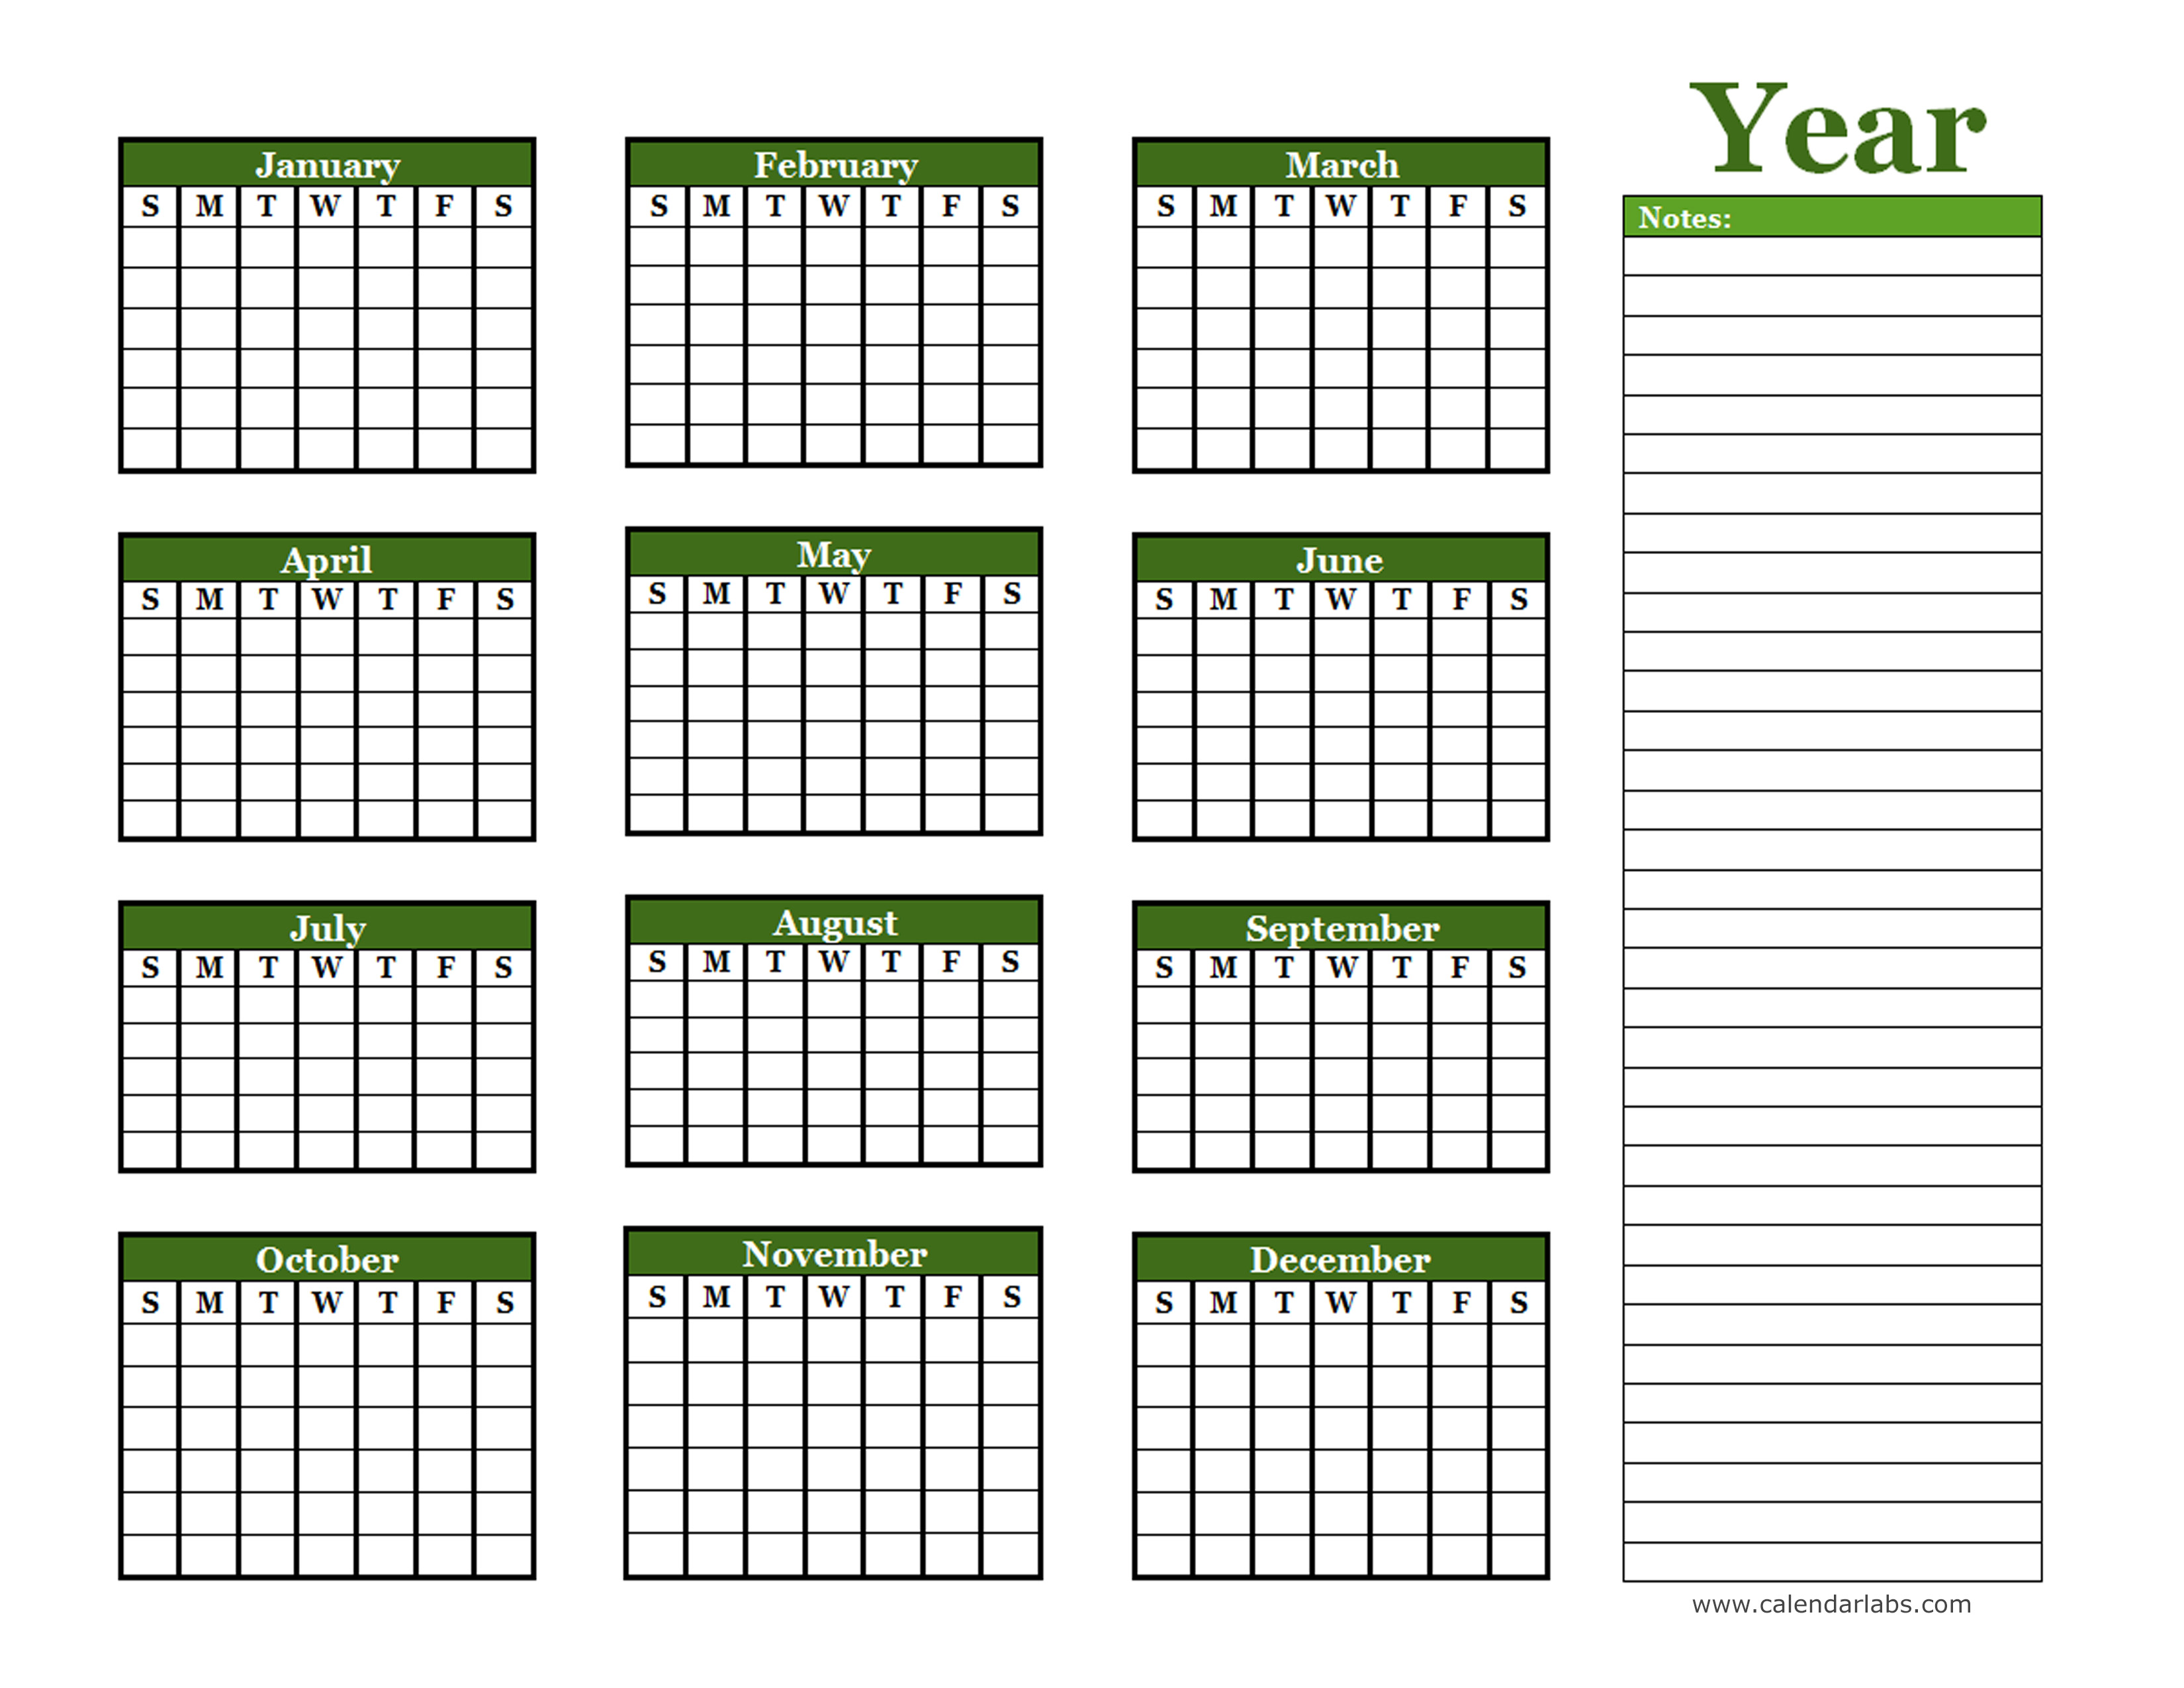 1 Year Calendar View Calendar Printables Free Templates Images and